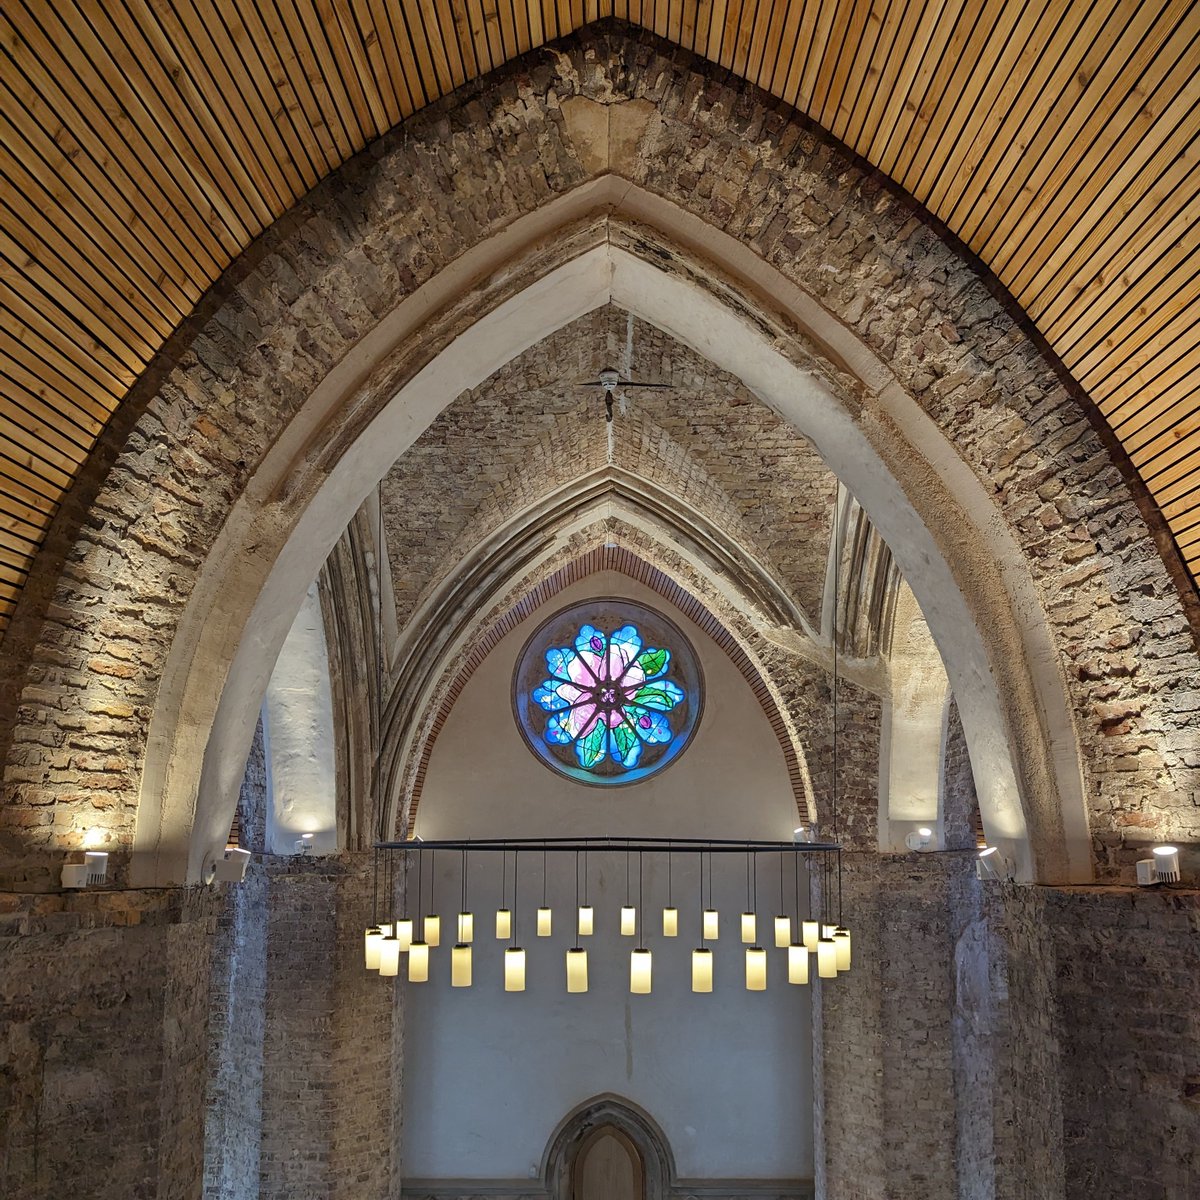 See inside the newly refurbished chapel in Abney Park! There will be a series of free short tours this Sunday hosted by @AbneyParkN16, giving you an insight into the Chapel’s history and a picture of what's planned for the upcoming year.